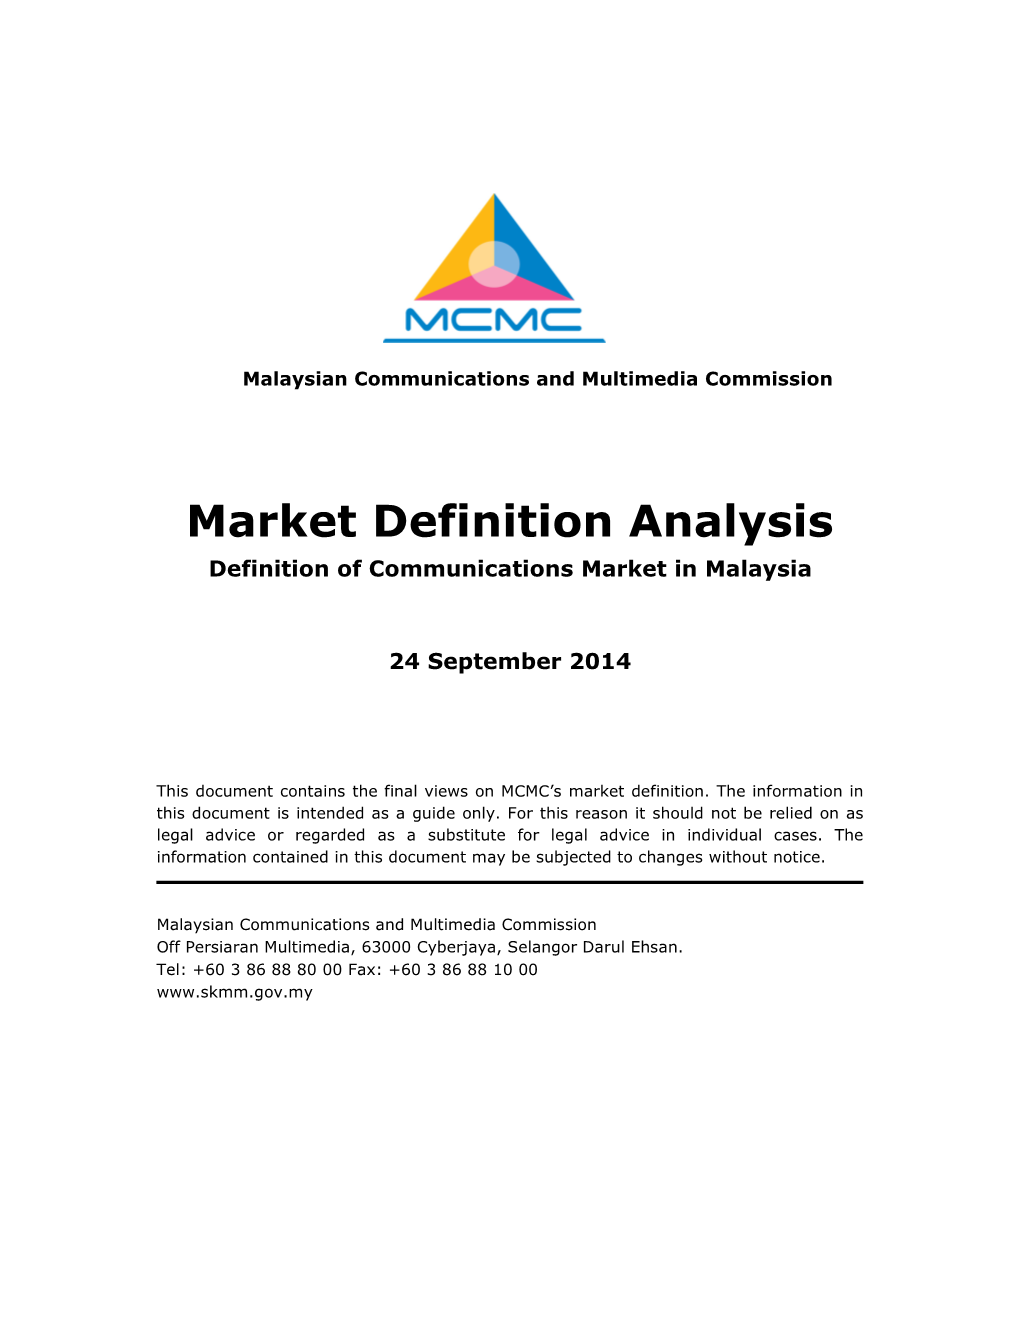 Market Definition Analysis Definition of Communications Market in Malaysia